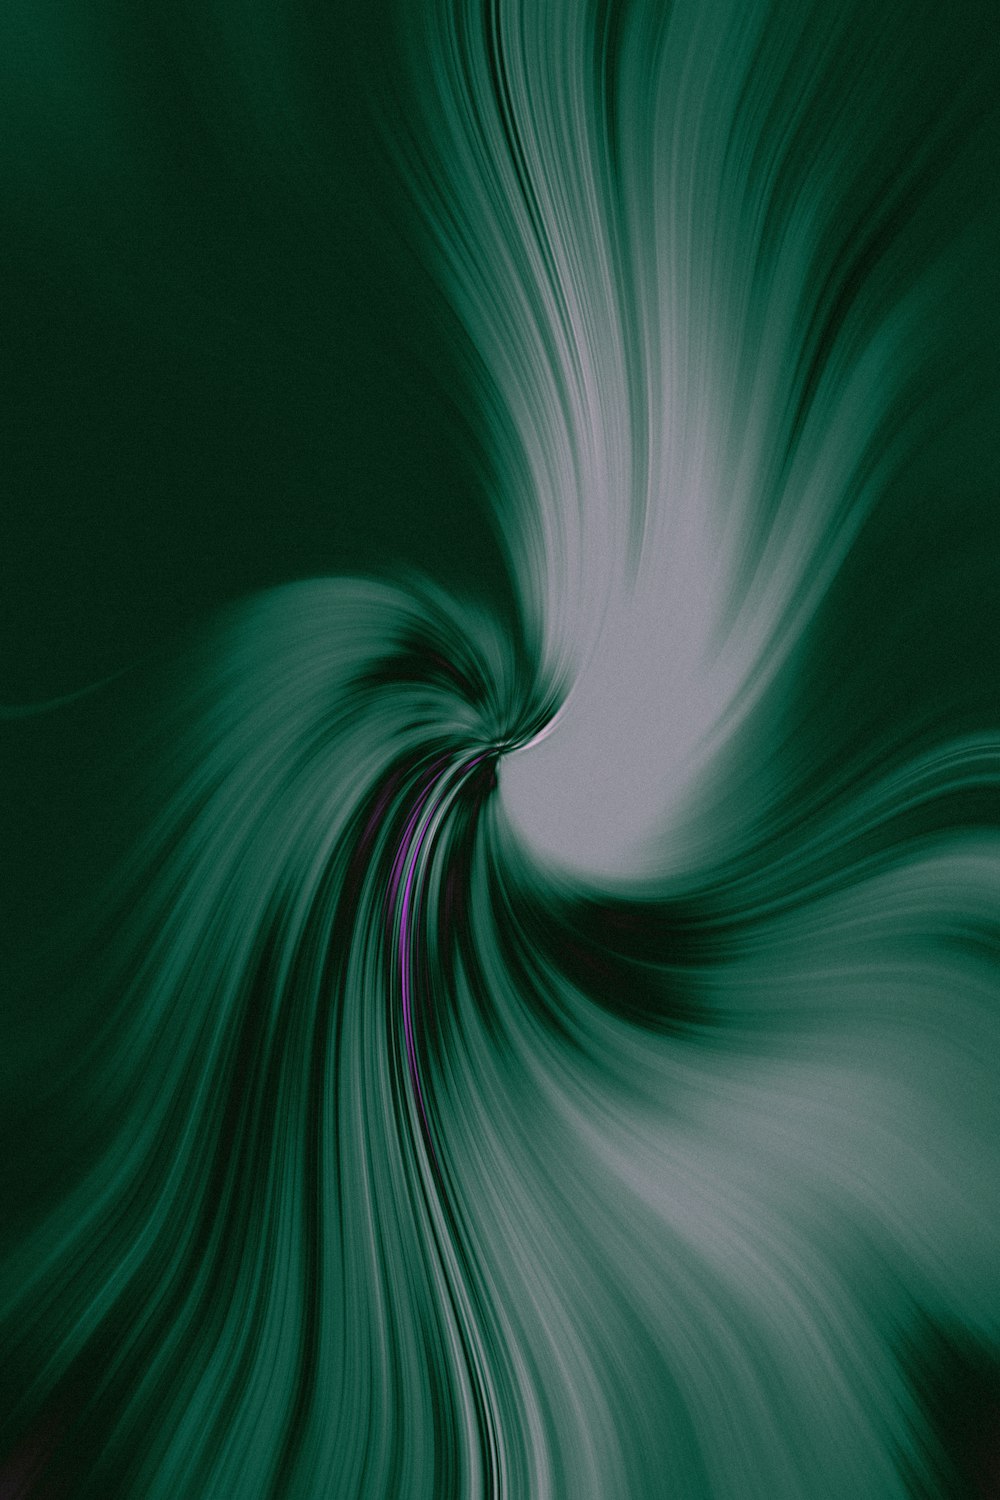 a green and white swirl with a black background